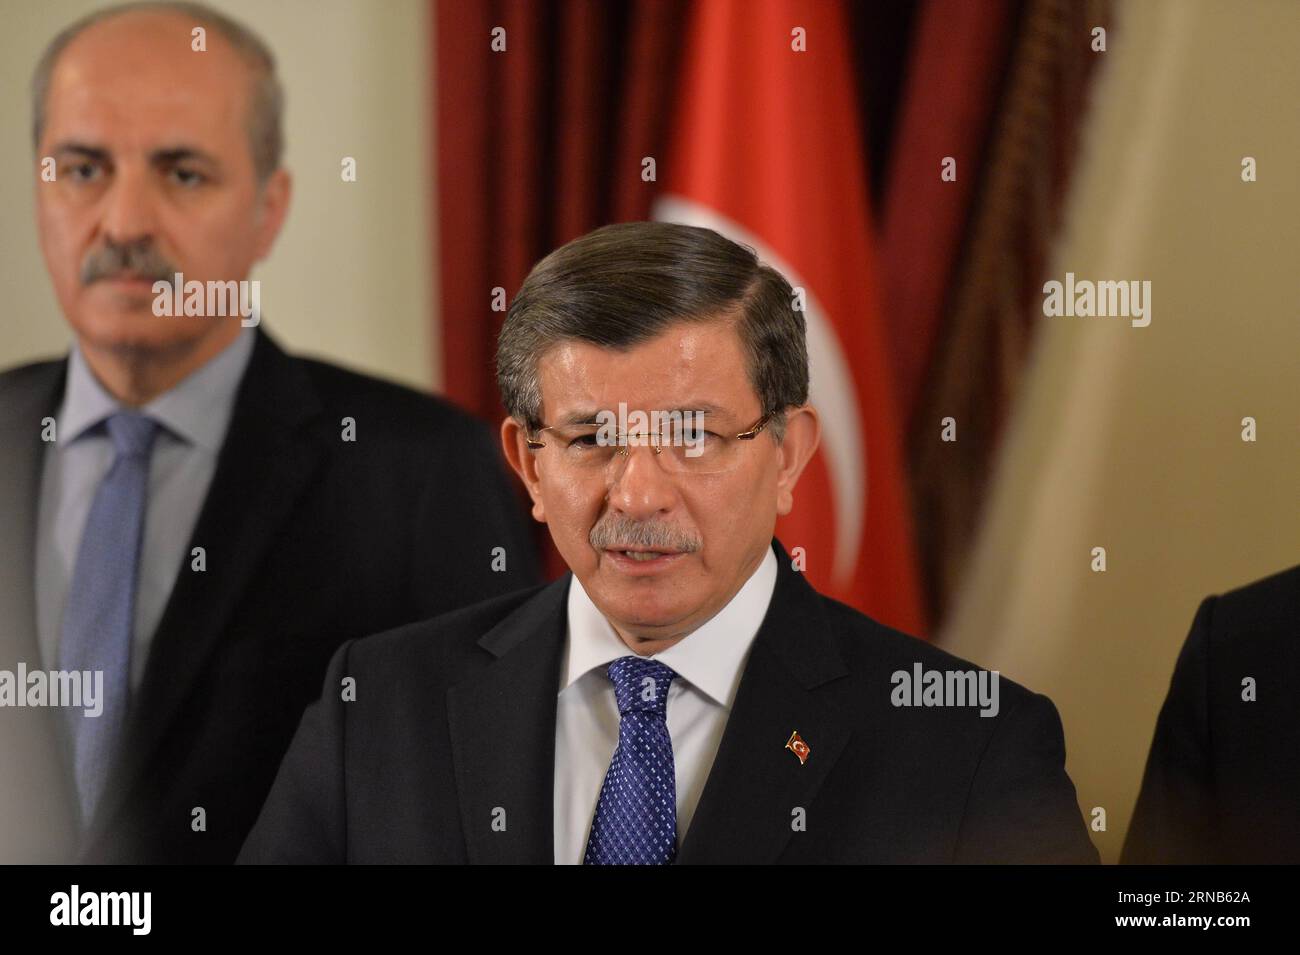 Turkish Prime Minister Ahmet Davutoglu speaks at a press conference after his meeting with Ankara Governor Mehmet Kliclar and other high-ranking officials in Ankara, capital of Turkey, Feb. 20, 2016. Turkish government will adopt new security measures designed particularly for different provinces, including a new concept for capital Ankara, Prime Minister Ahmet Davutoglu said on Saturday. ) TURKEY-ANKARA-PM-PRESS CONFERENCE-SECURITY MEASURES MustafaxKaya PUBLICATIONxNOTxINxCHN   Turkish Prime Ministers Ahmet Davutoglu Speaks AT a Press Conference After His Meeting With Ankara Governor Mehmet Stock Photo